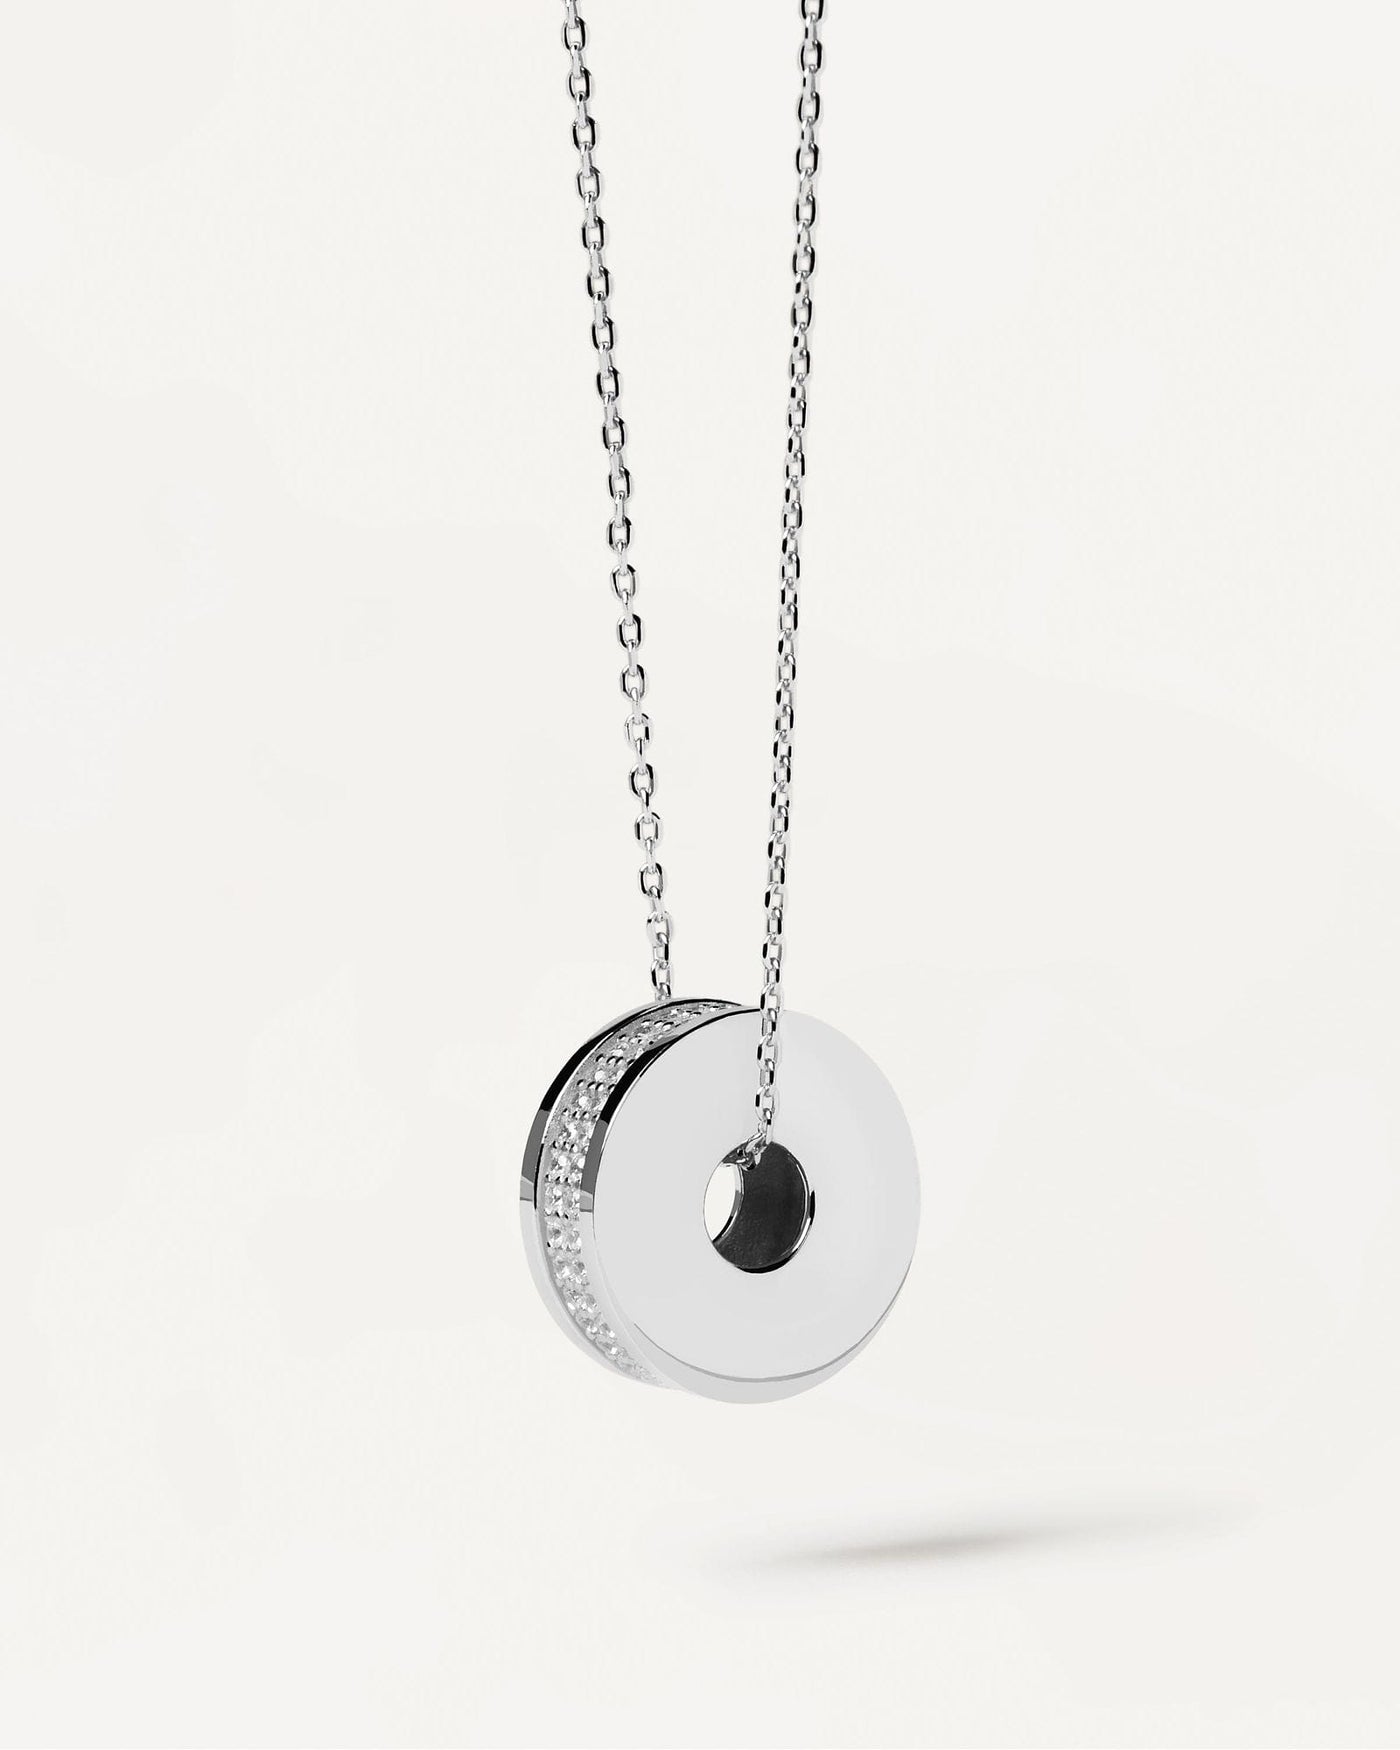 2024 Selection | Atlas Silver Necklace. Sterling silver necklace with disc pendant. Get the latest arrival from PDPAOLA. Place your order safely and get this Best Seller. Free Shipping.